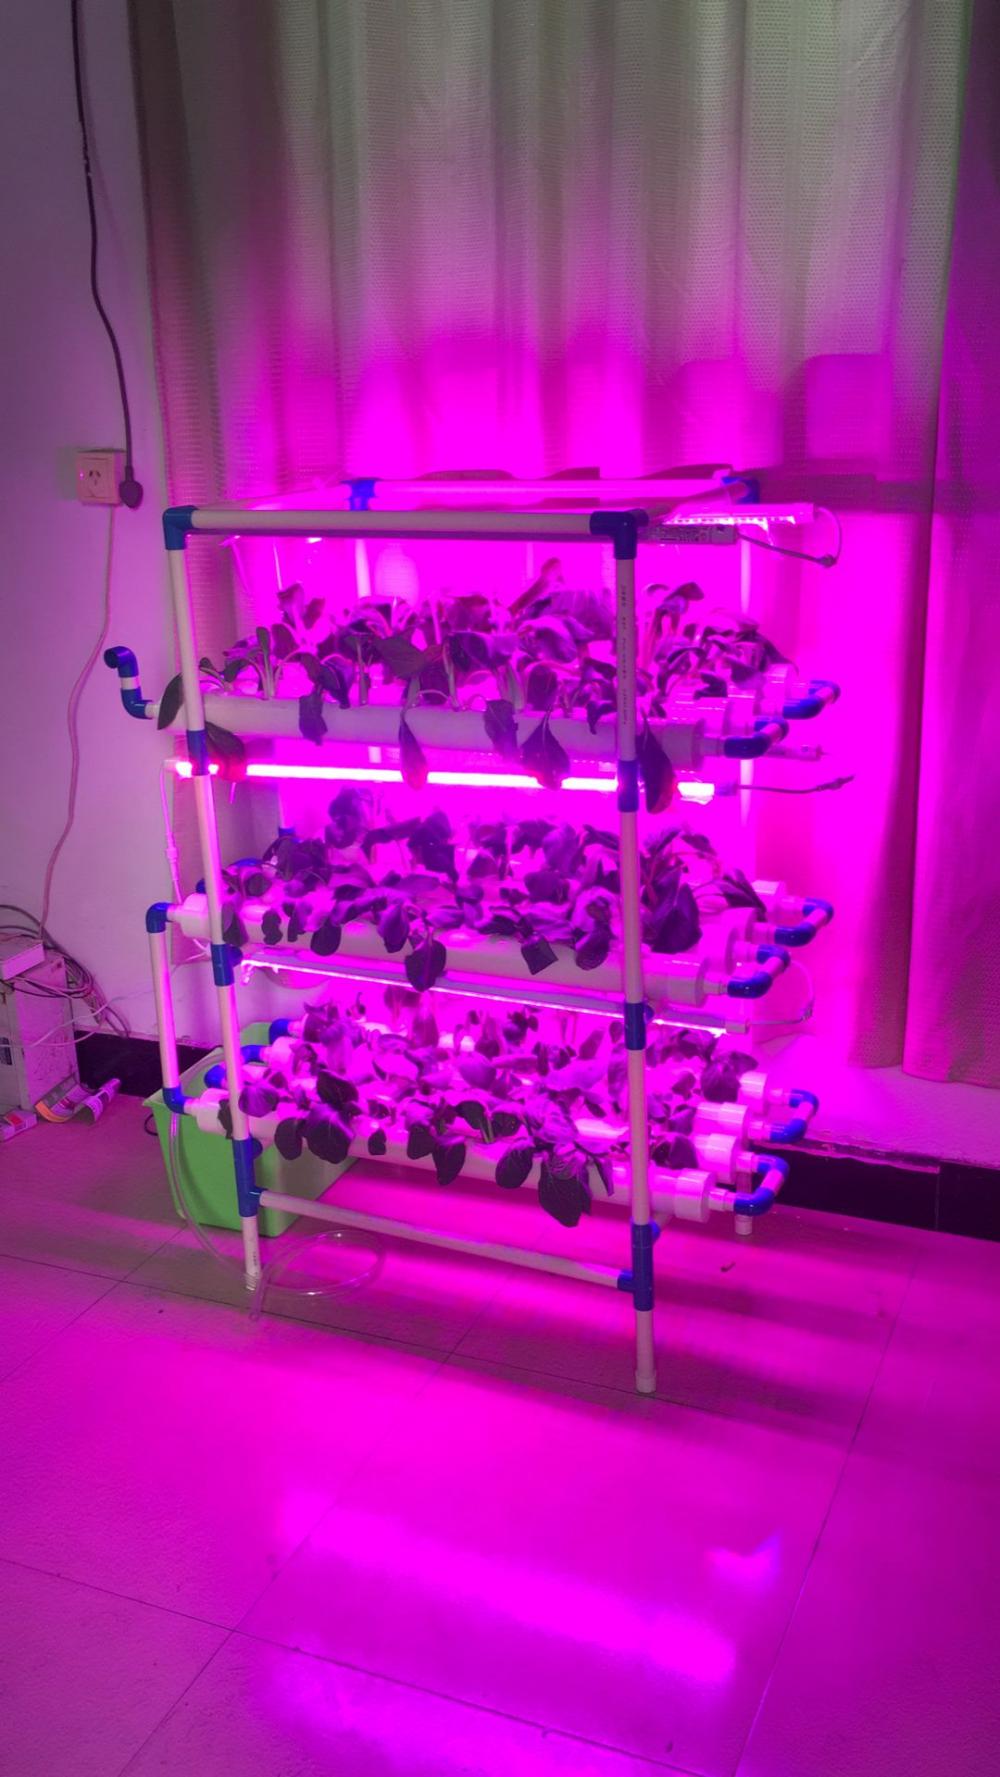 Small Kit hydroponic system